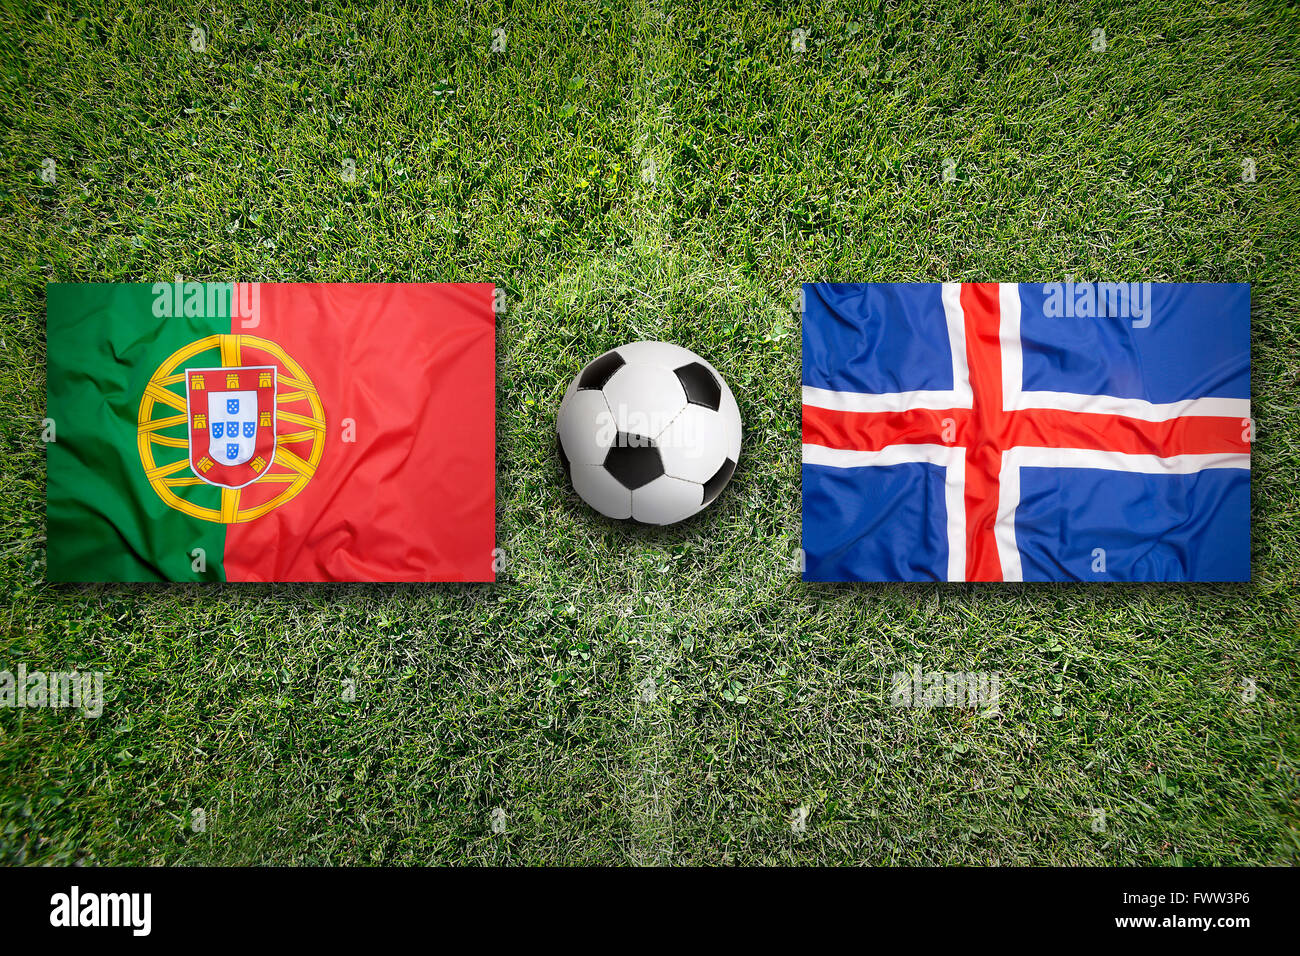 Portugal vs. Iceland flags on green soccer field Stock Photo